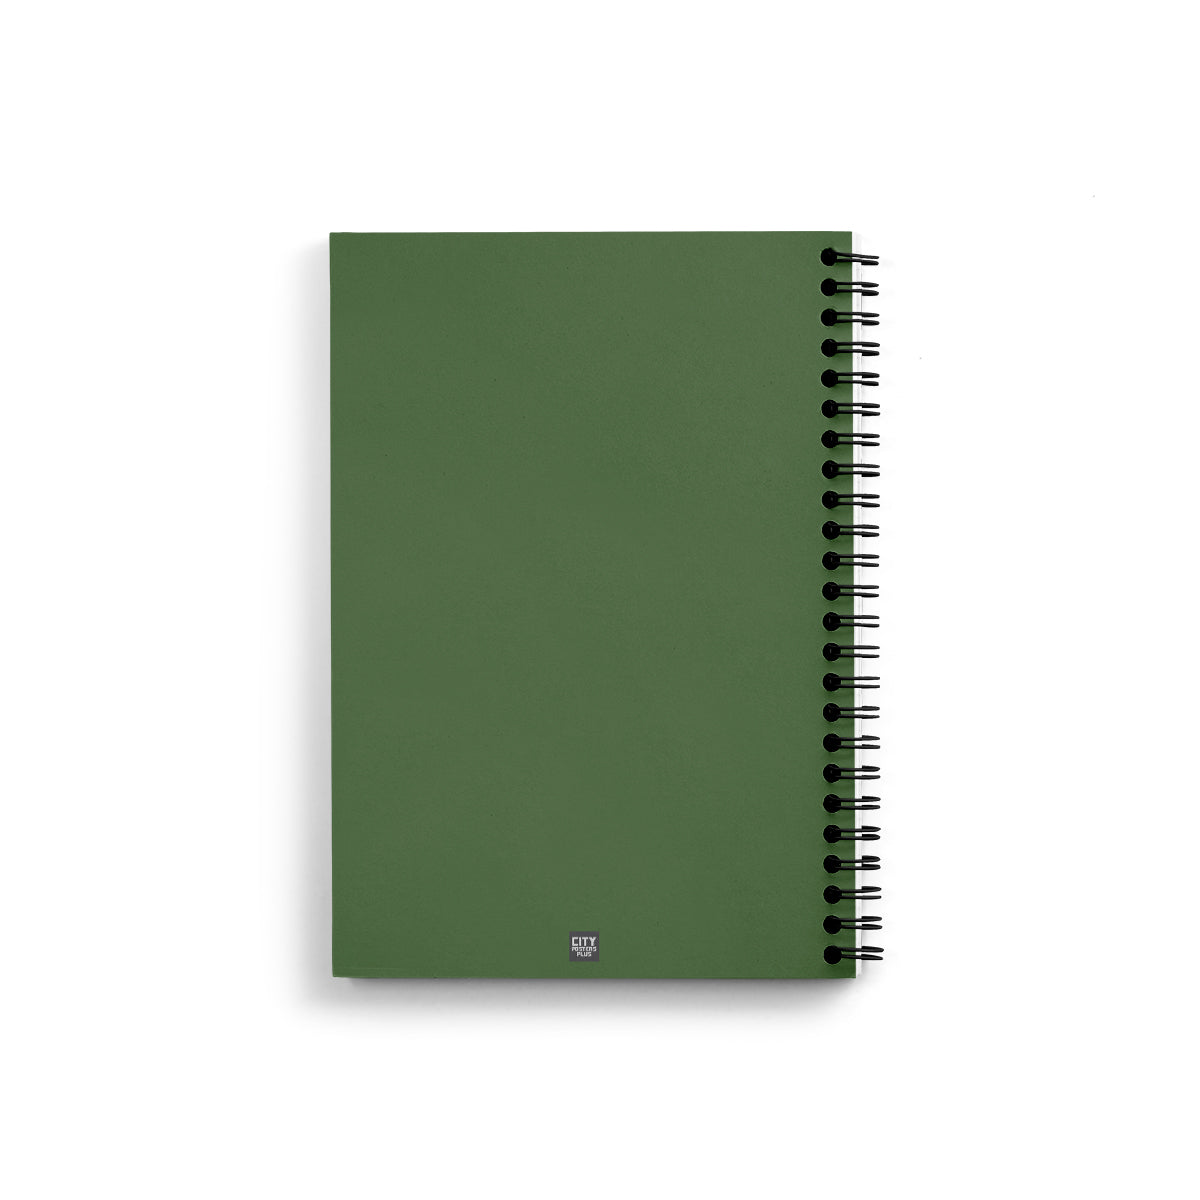 51 Number Notebook (Olive Green, A5 Size, 100 Pages, Ruled, 4 Pack)